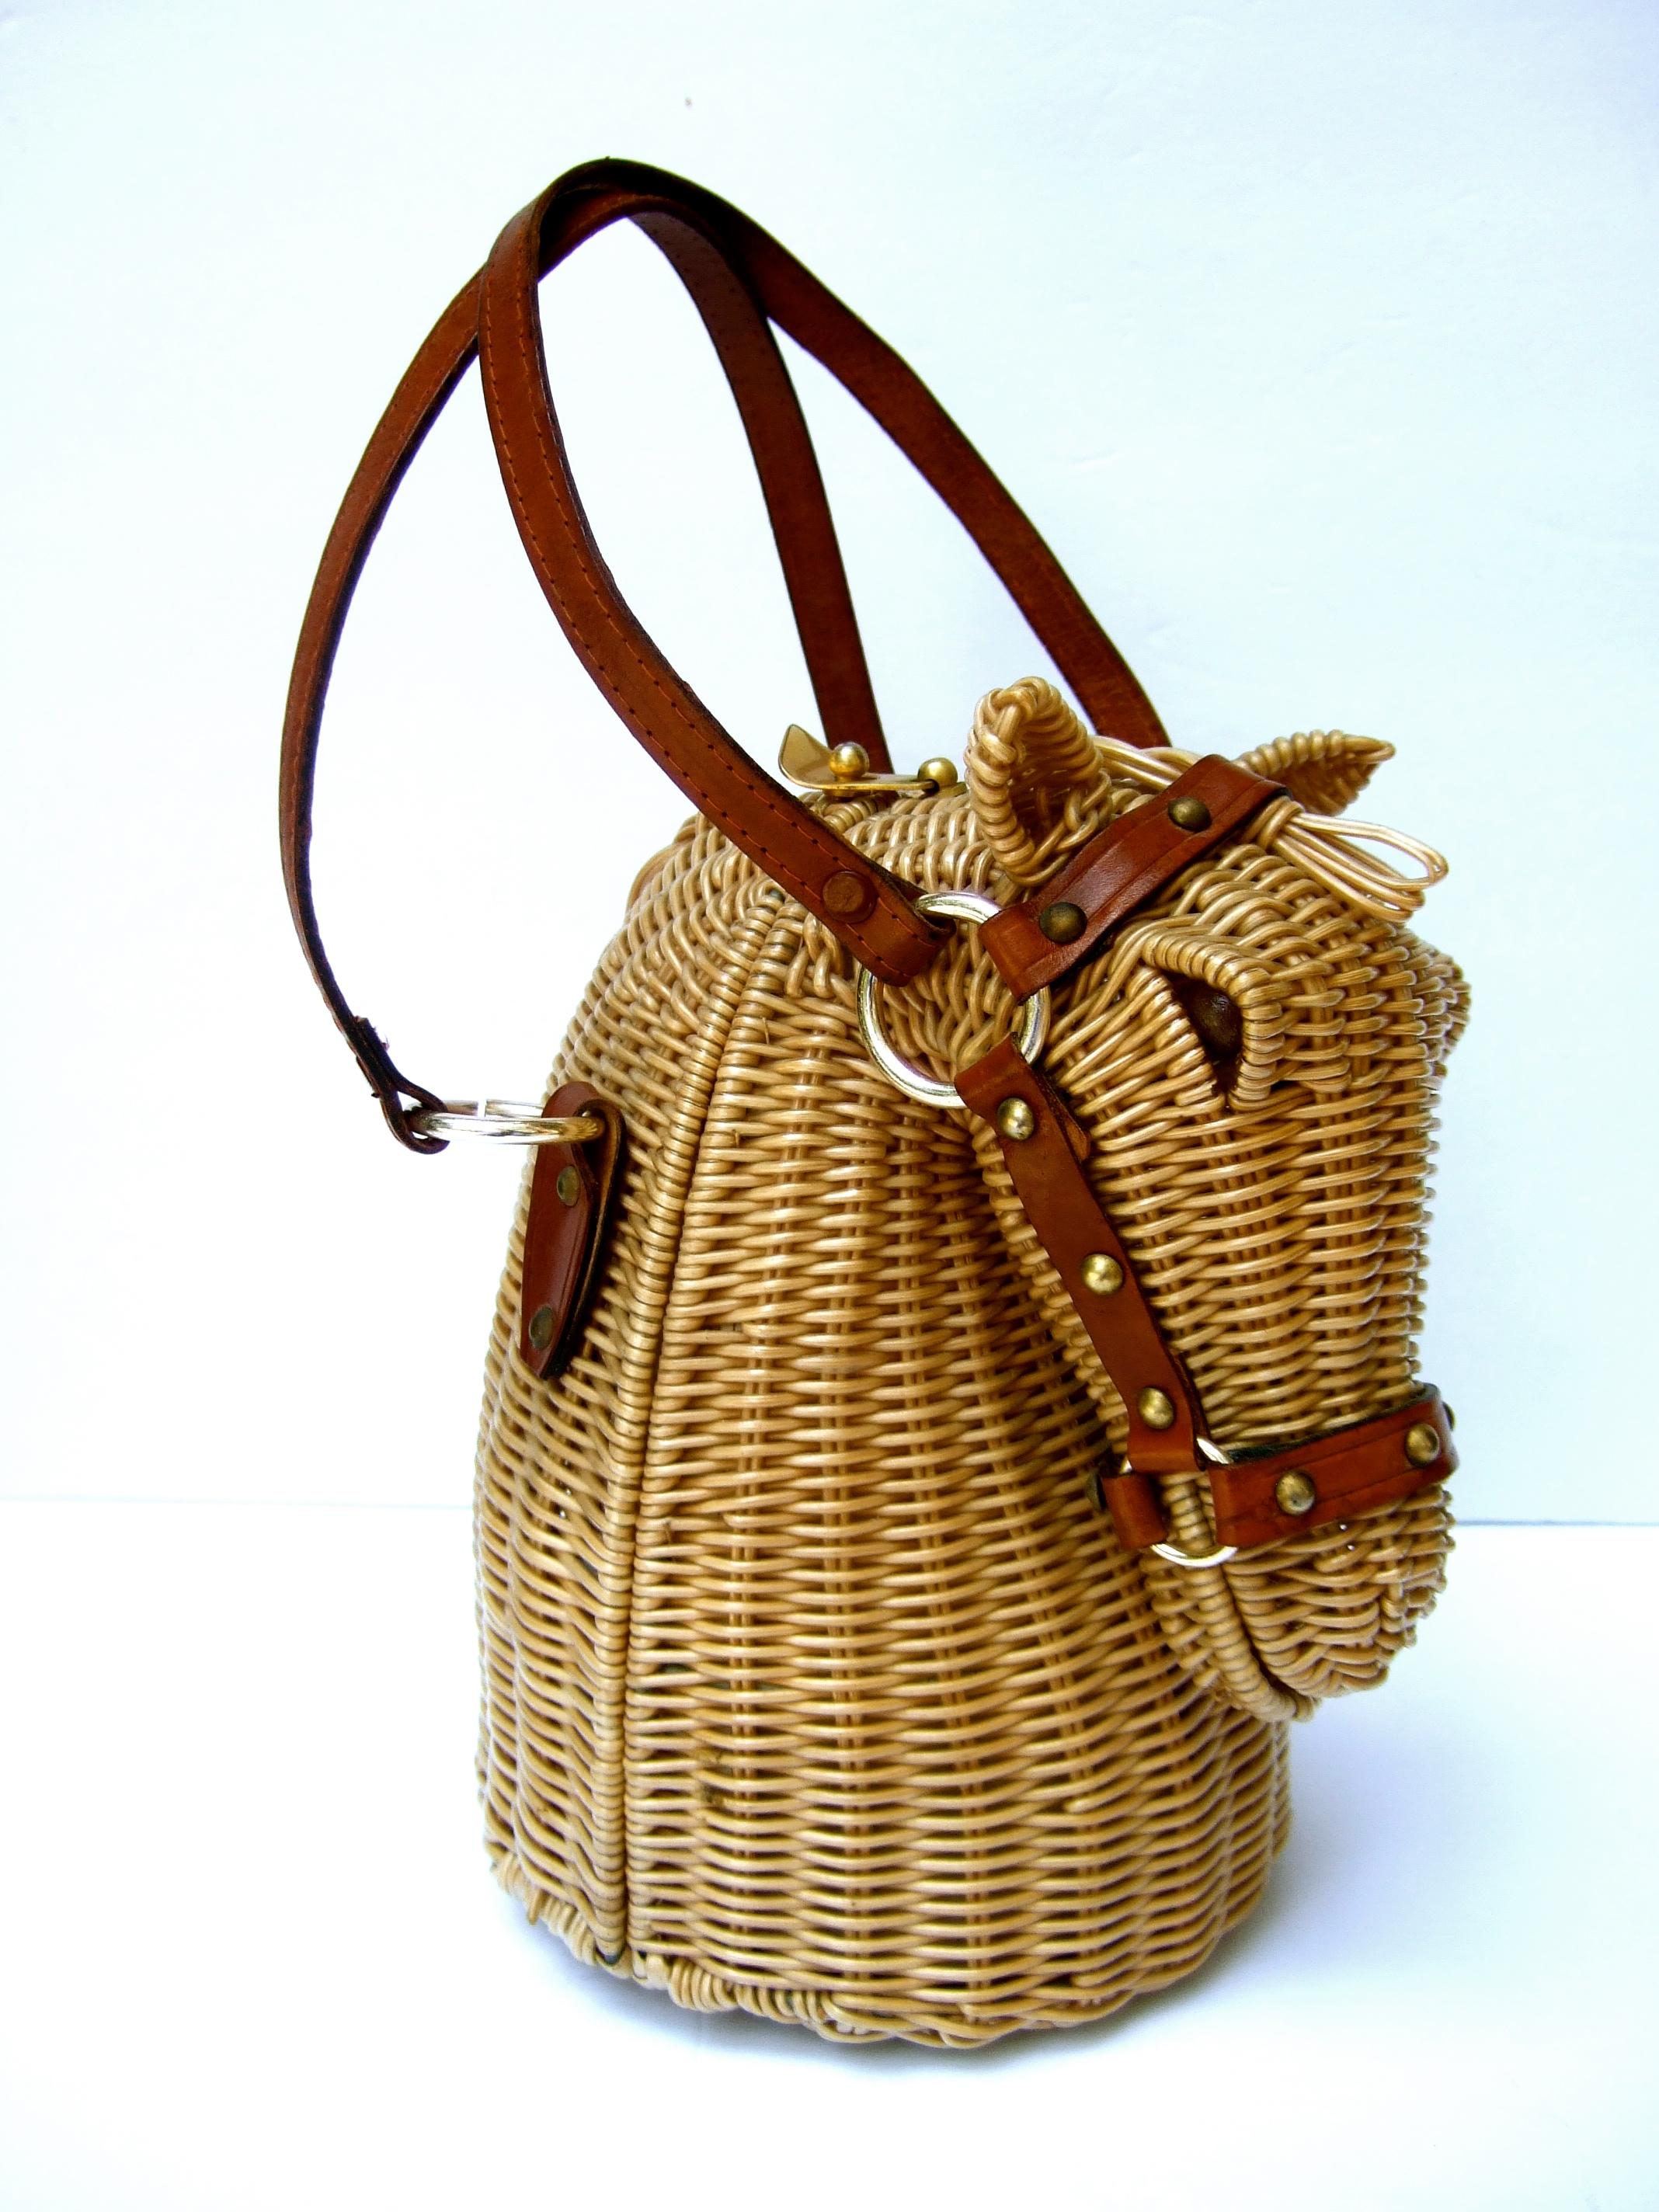 Extremely Rare Wicker Rattan Equine Handbag Designed by Marcus Brothers c 1970 1